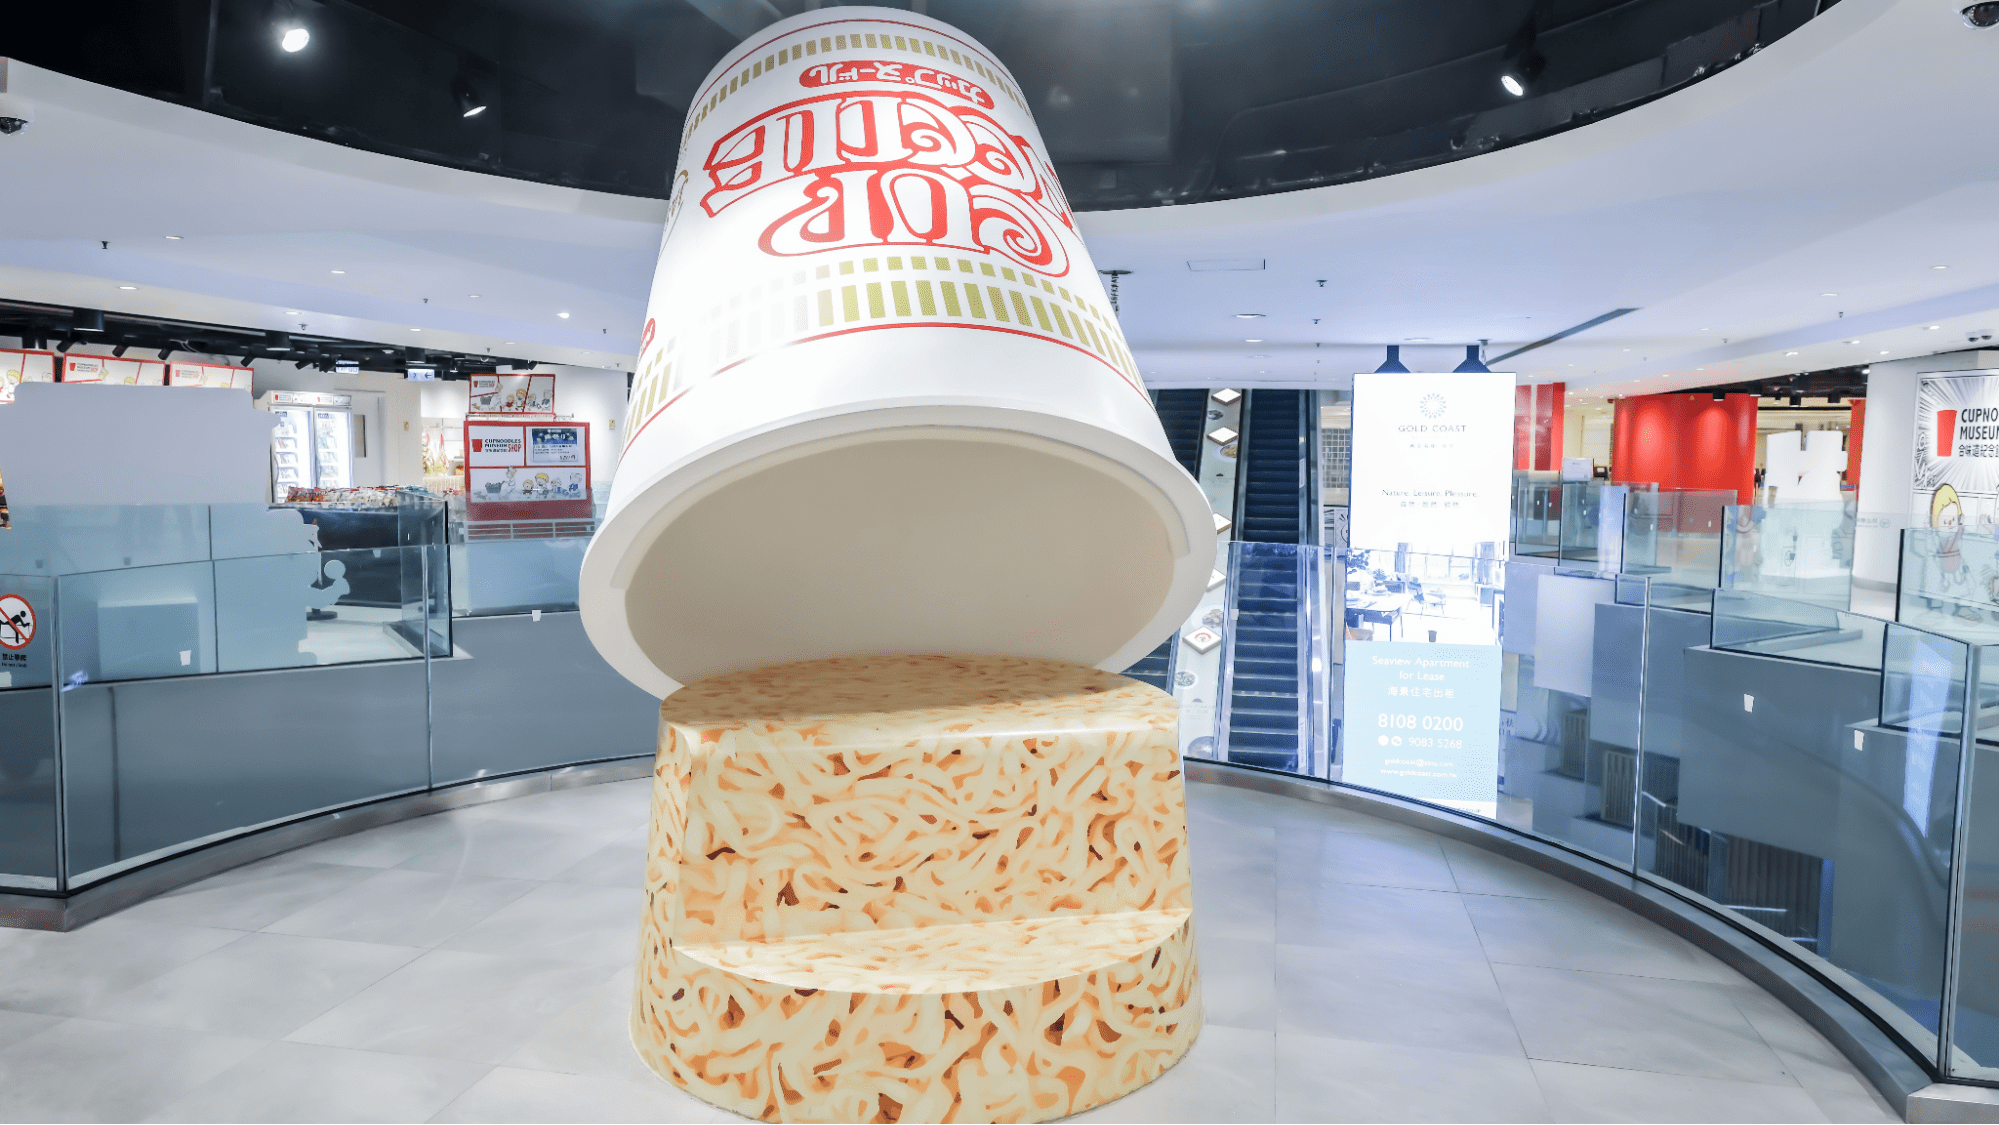 Cup Noodles Model At CUPNOODLES Museum Hong Kong